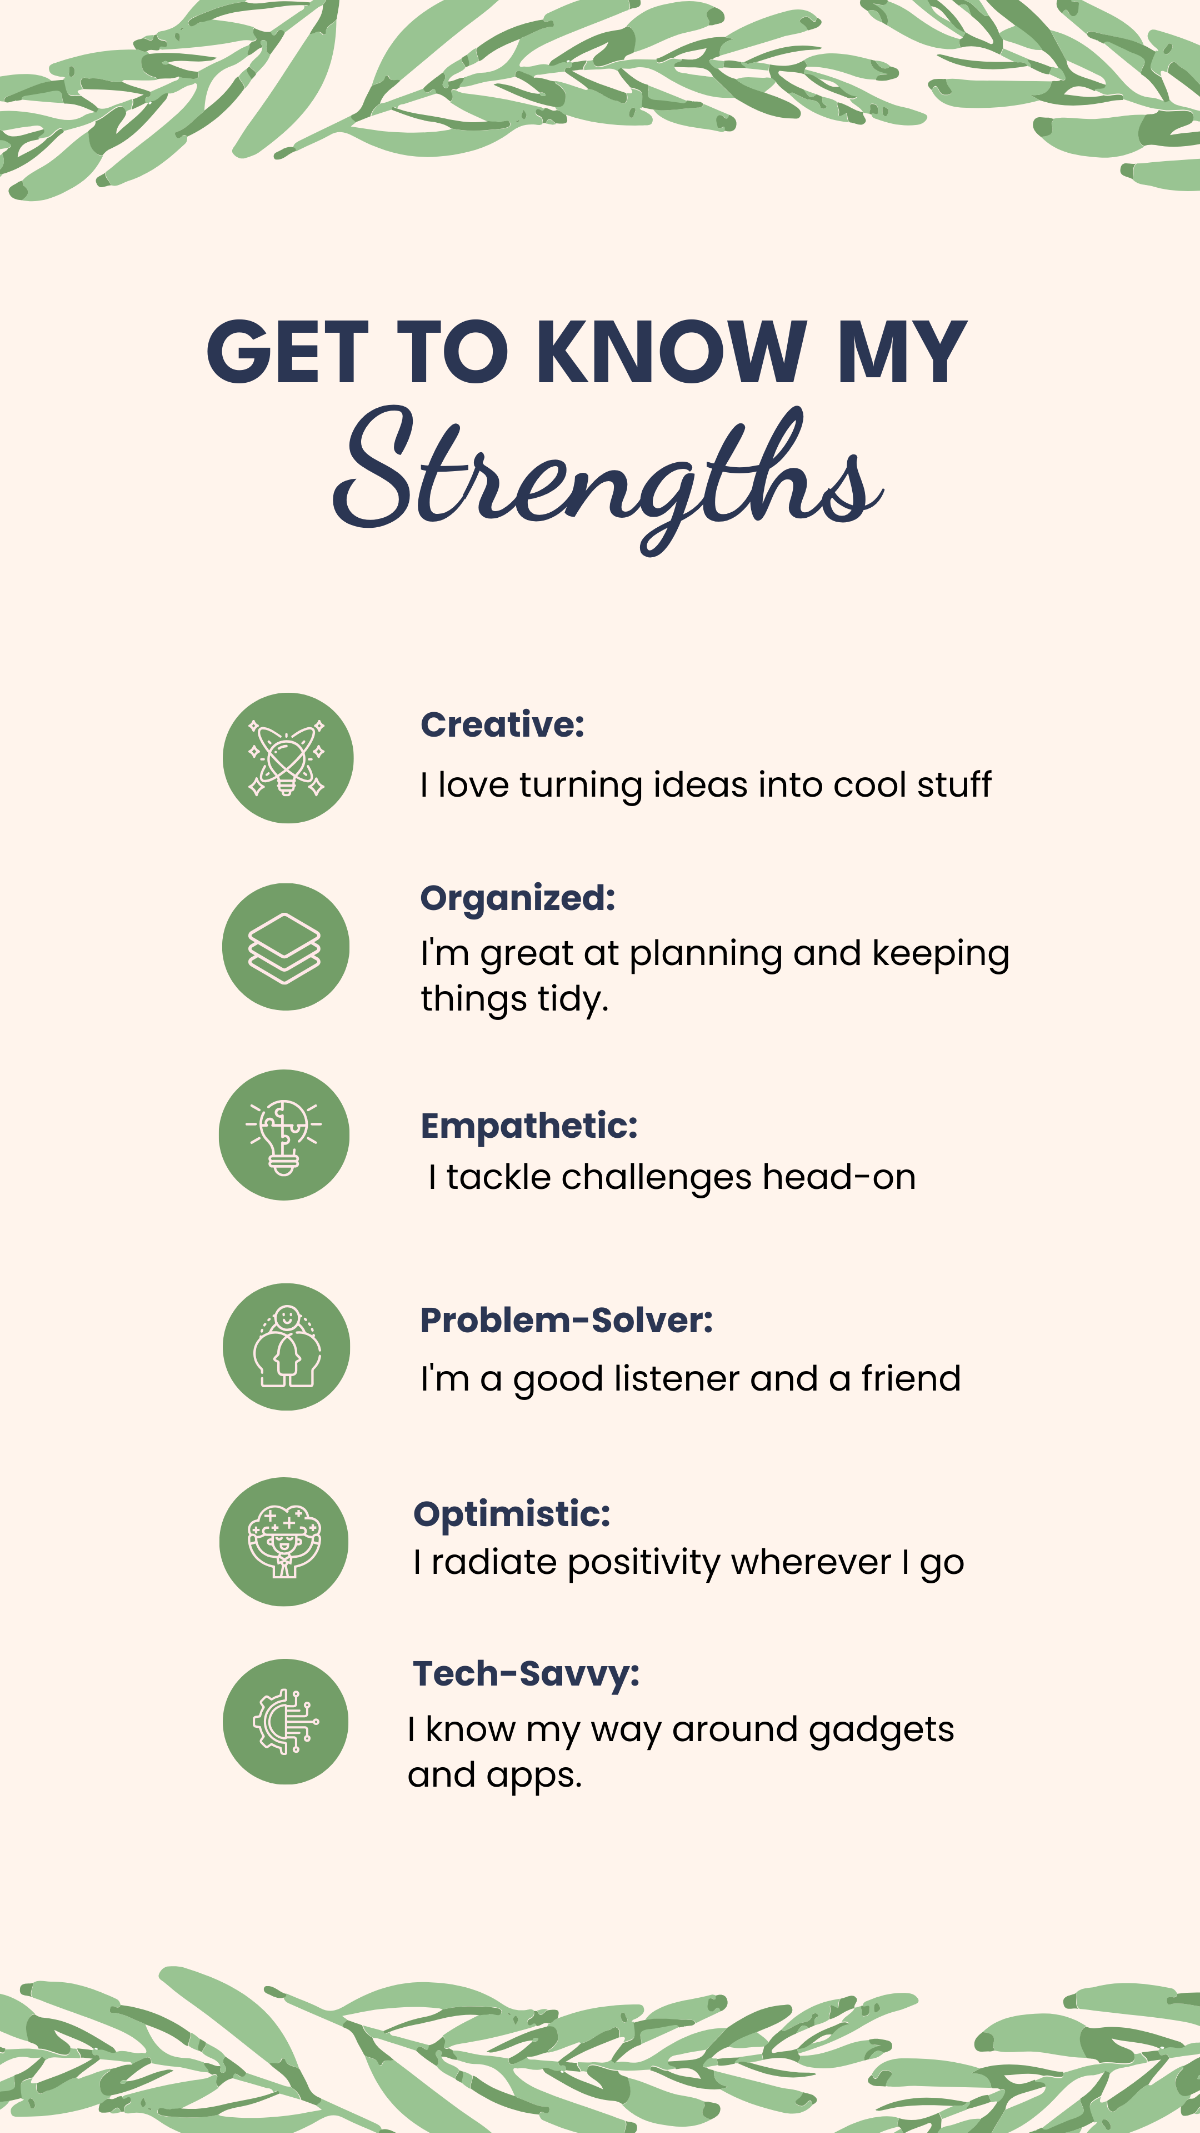 Get to Know My Strengths